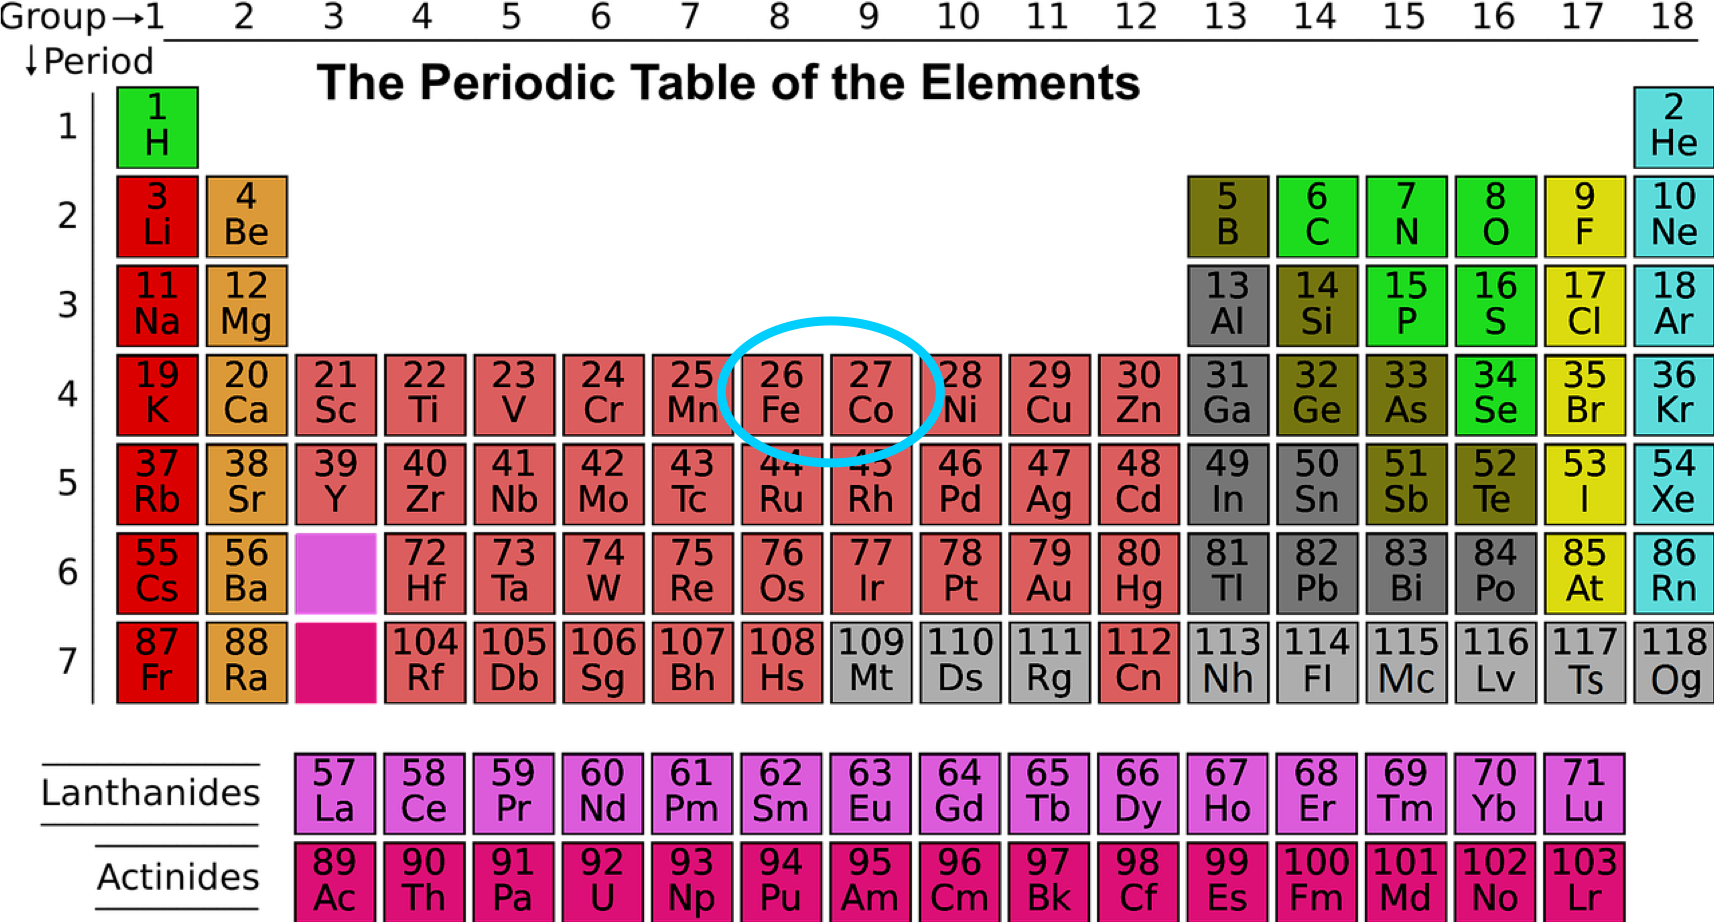 Iron and cobalt (circled in blue) are next to one another on the periodic table. This means the atomic structures of FeS2 and CoS2 are similar.